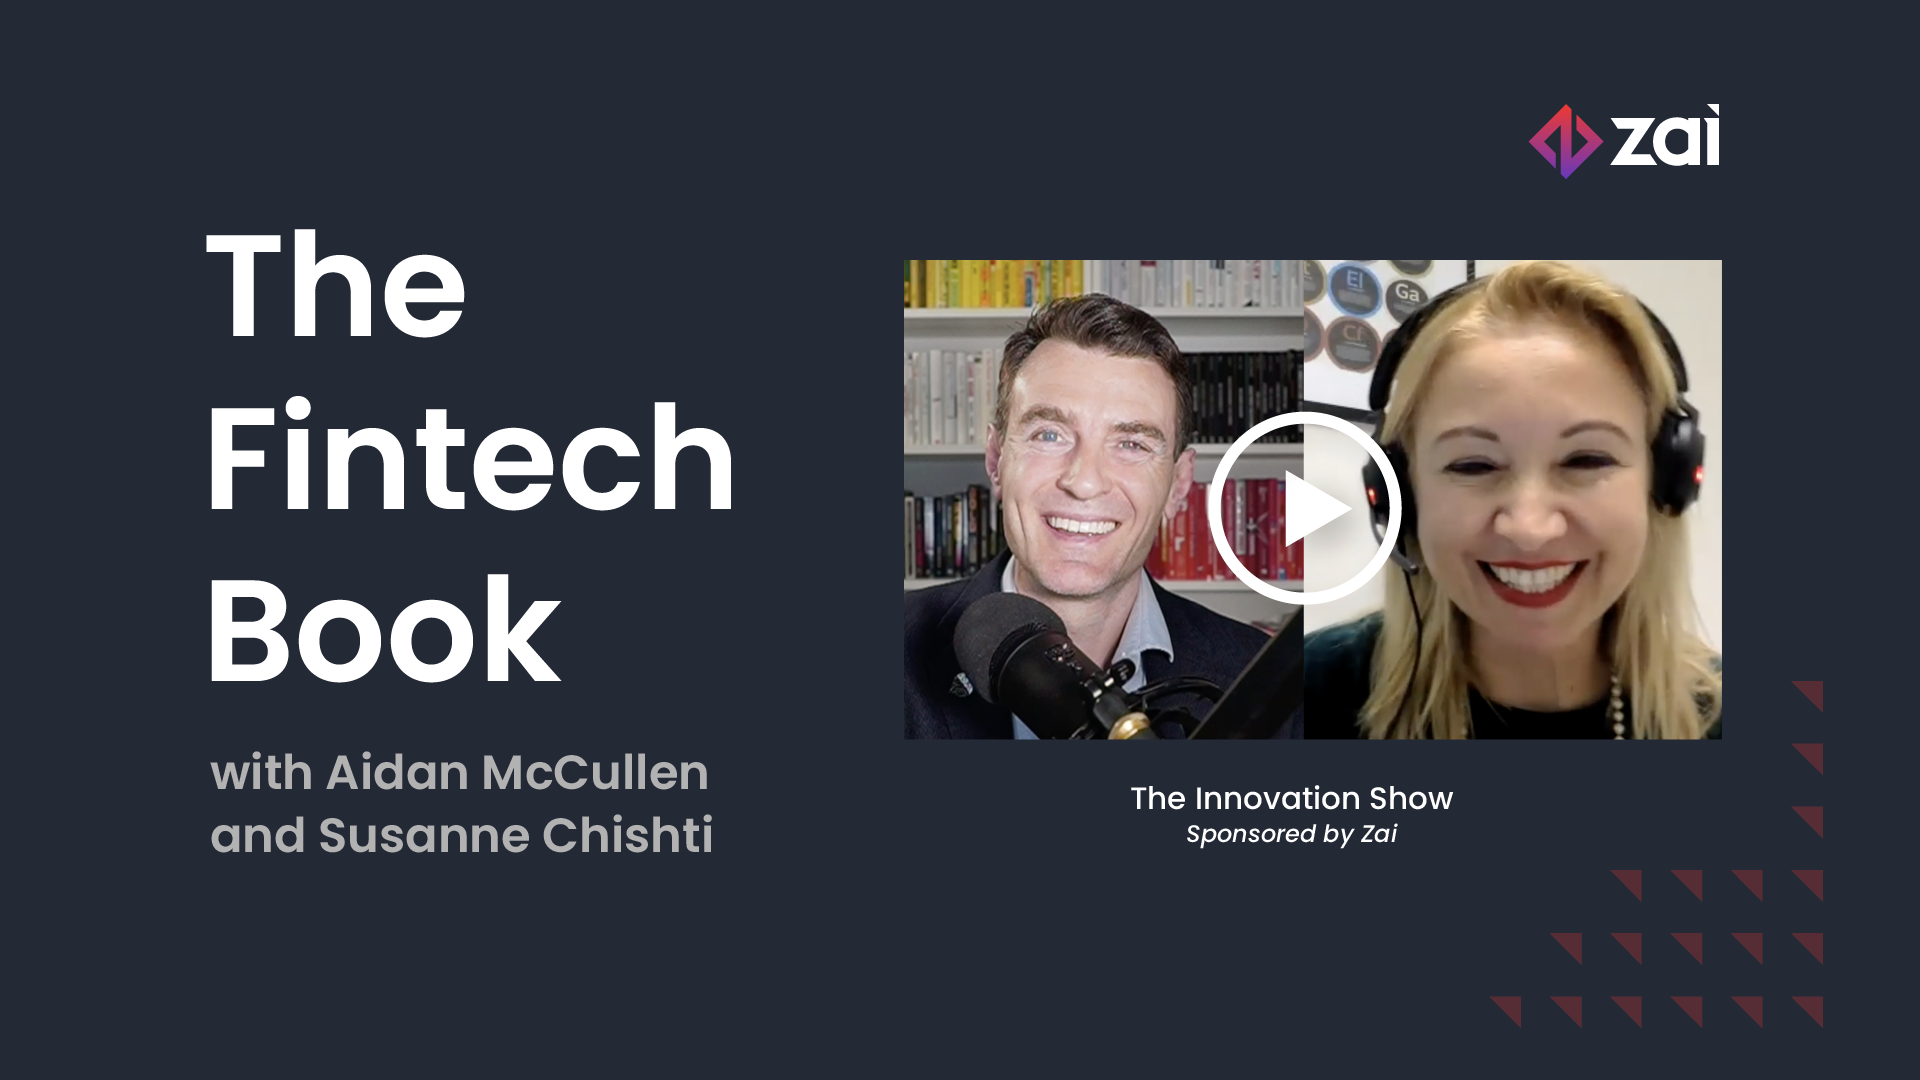 Susanne Chishti podcast with Aidan McCullen of The Innovation Show